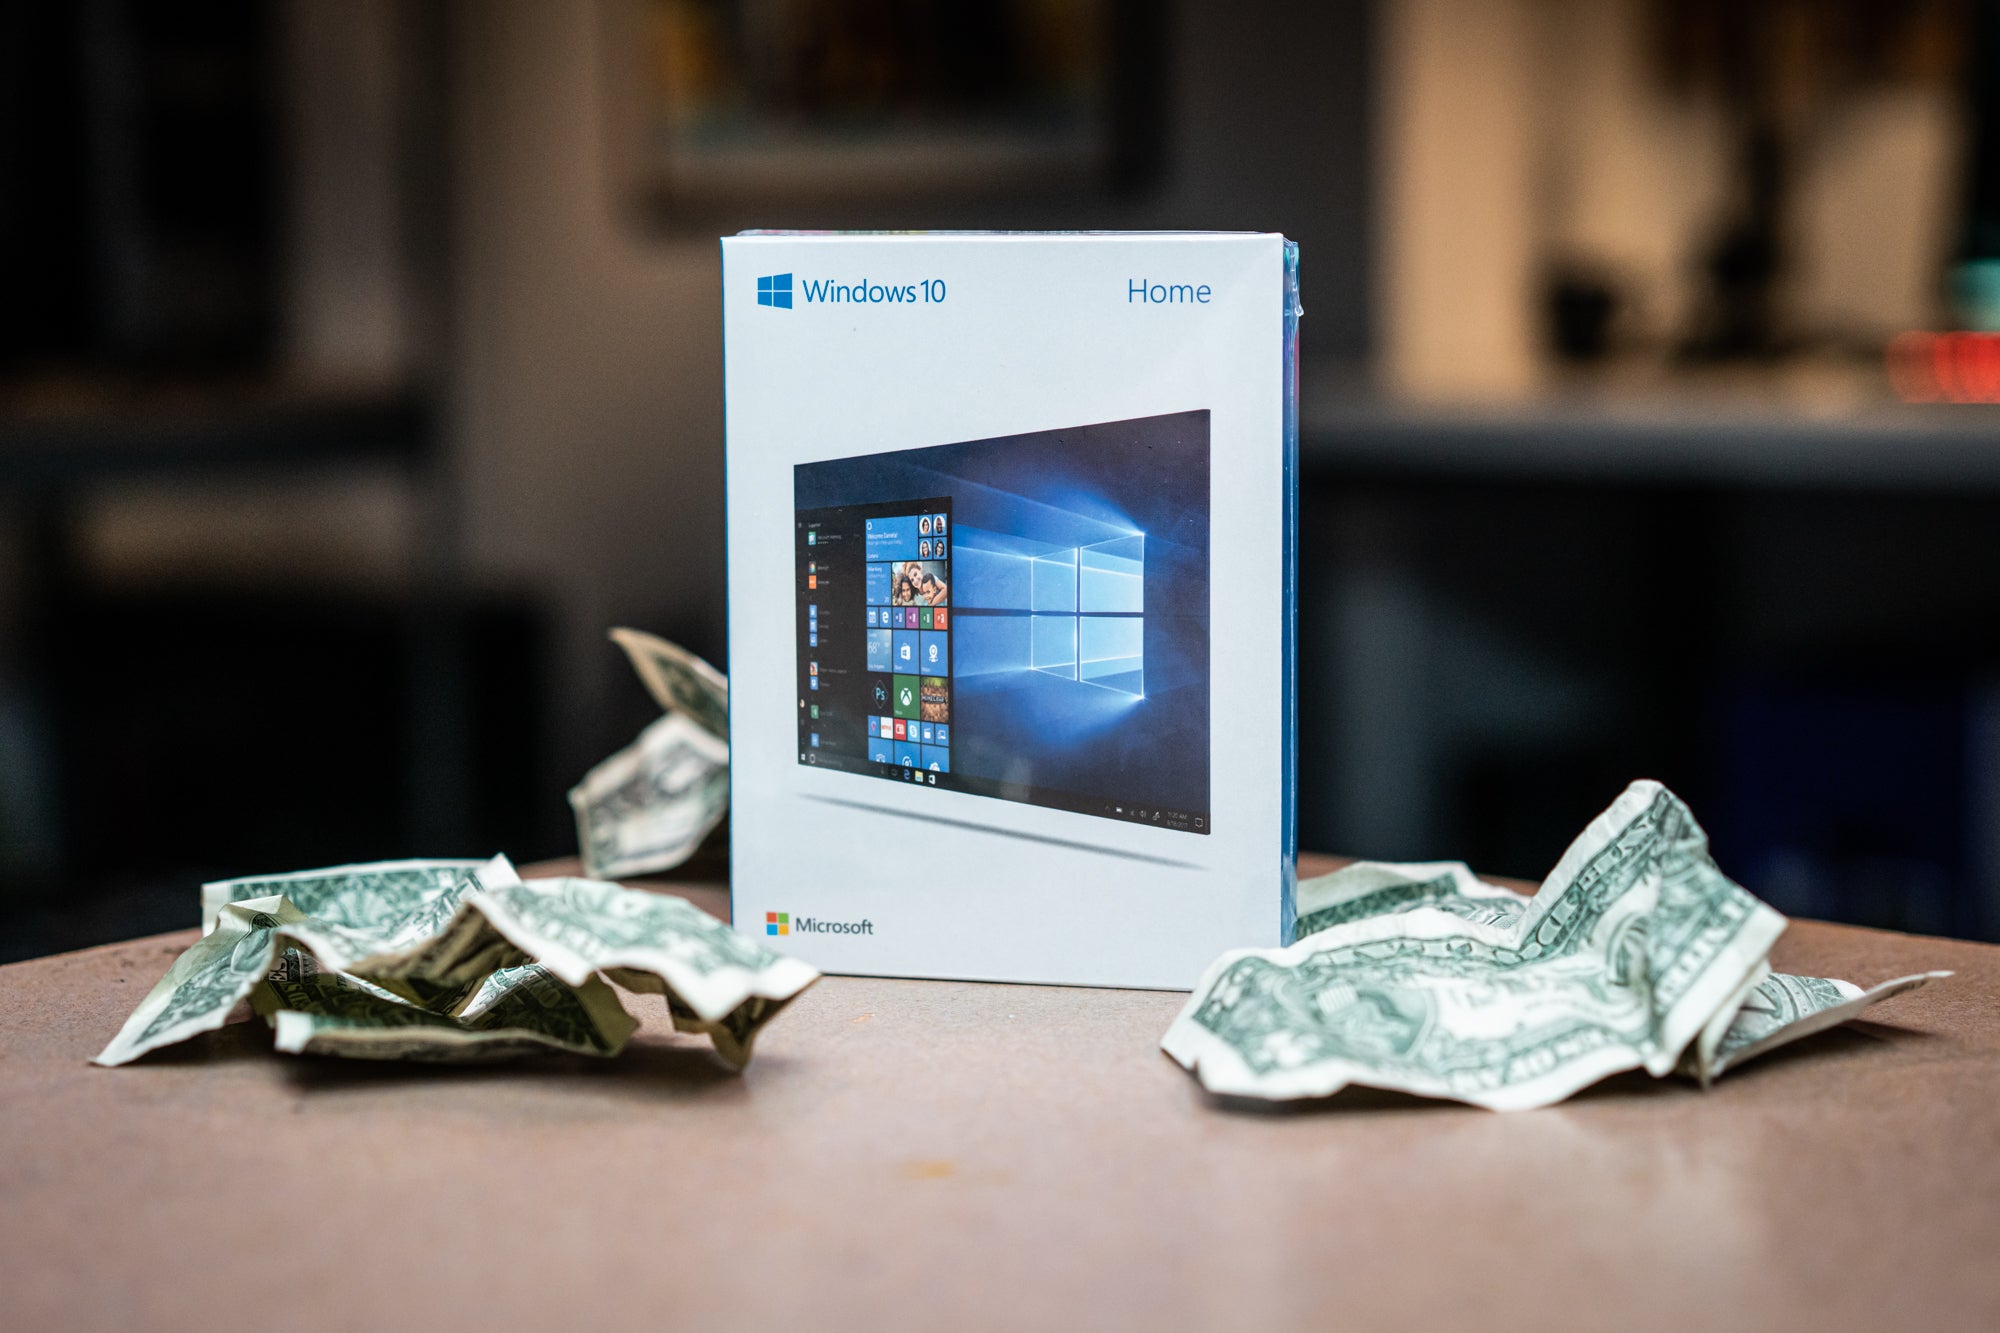 How to buy cheap and genuine Microsoft software? Windows 10 for $